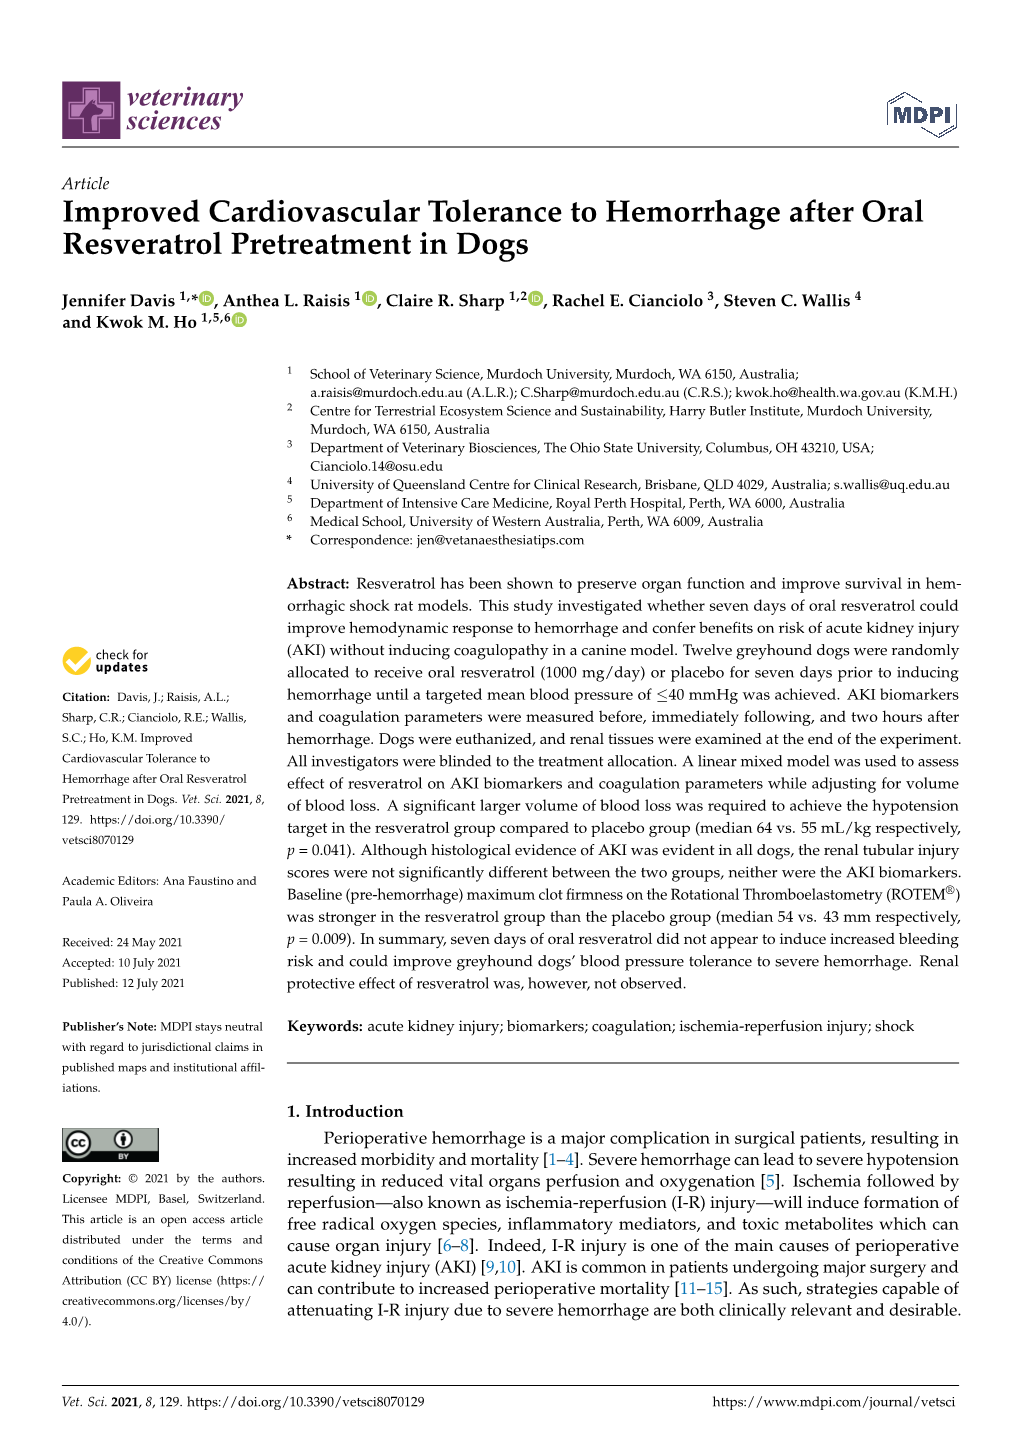 Improved Cardiovascular Tolerance to Hemorrhage After Oral Resveratrol Pretreatment in Dogs